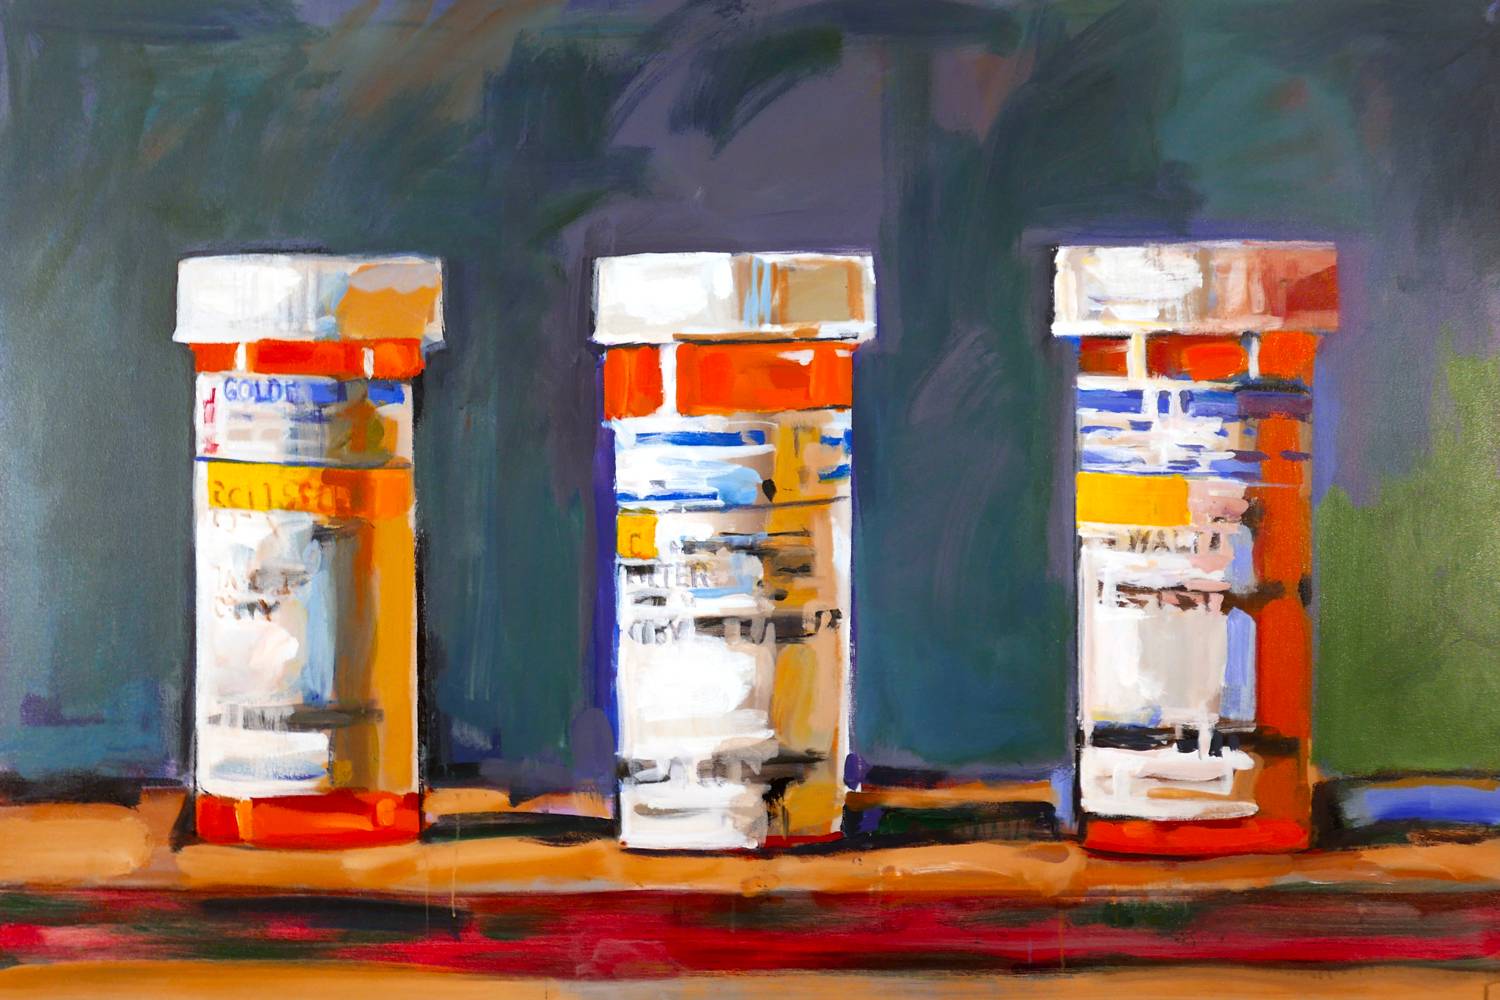 Daily Medications, Walter Robinson, 2020. Acrylic on canvas. 101,5 x 152 cm (40 x 60 in)